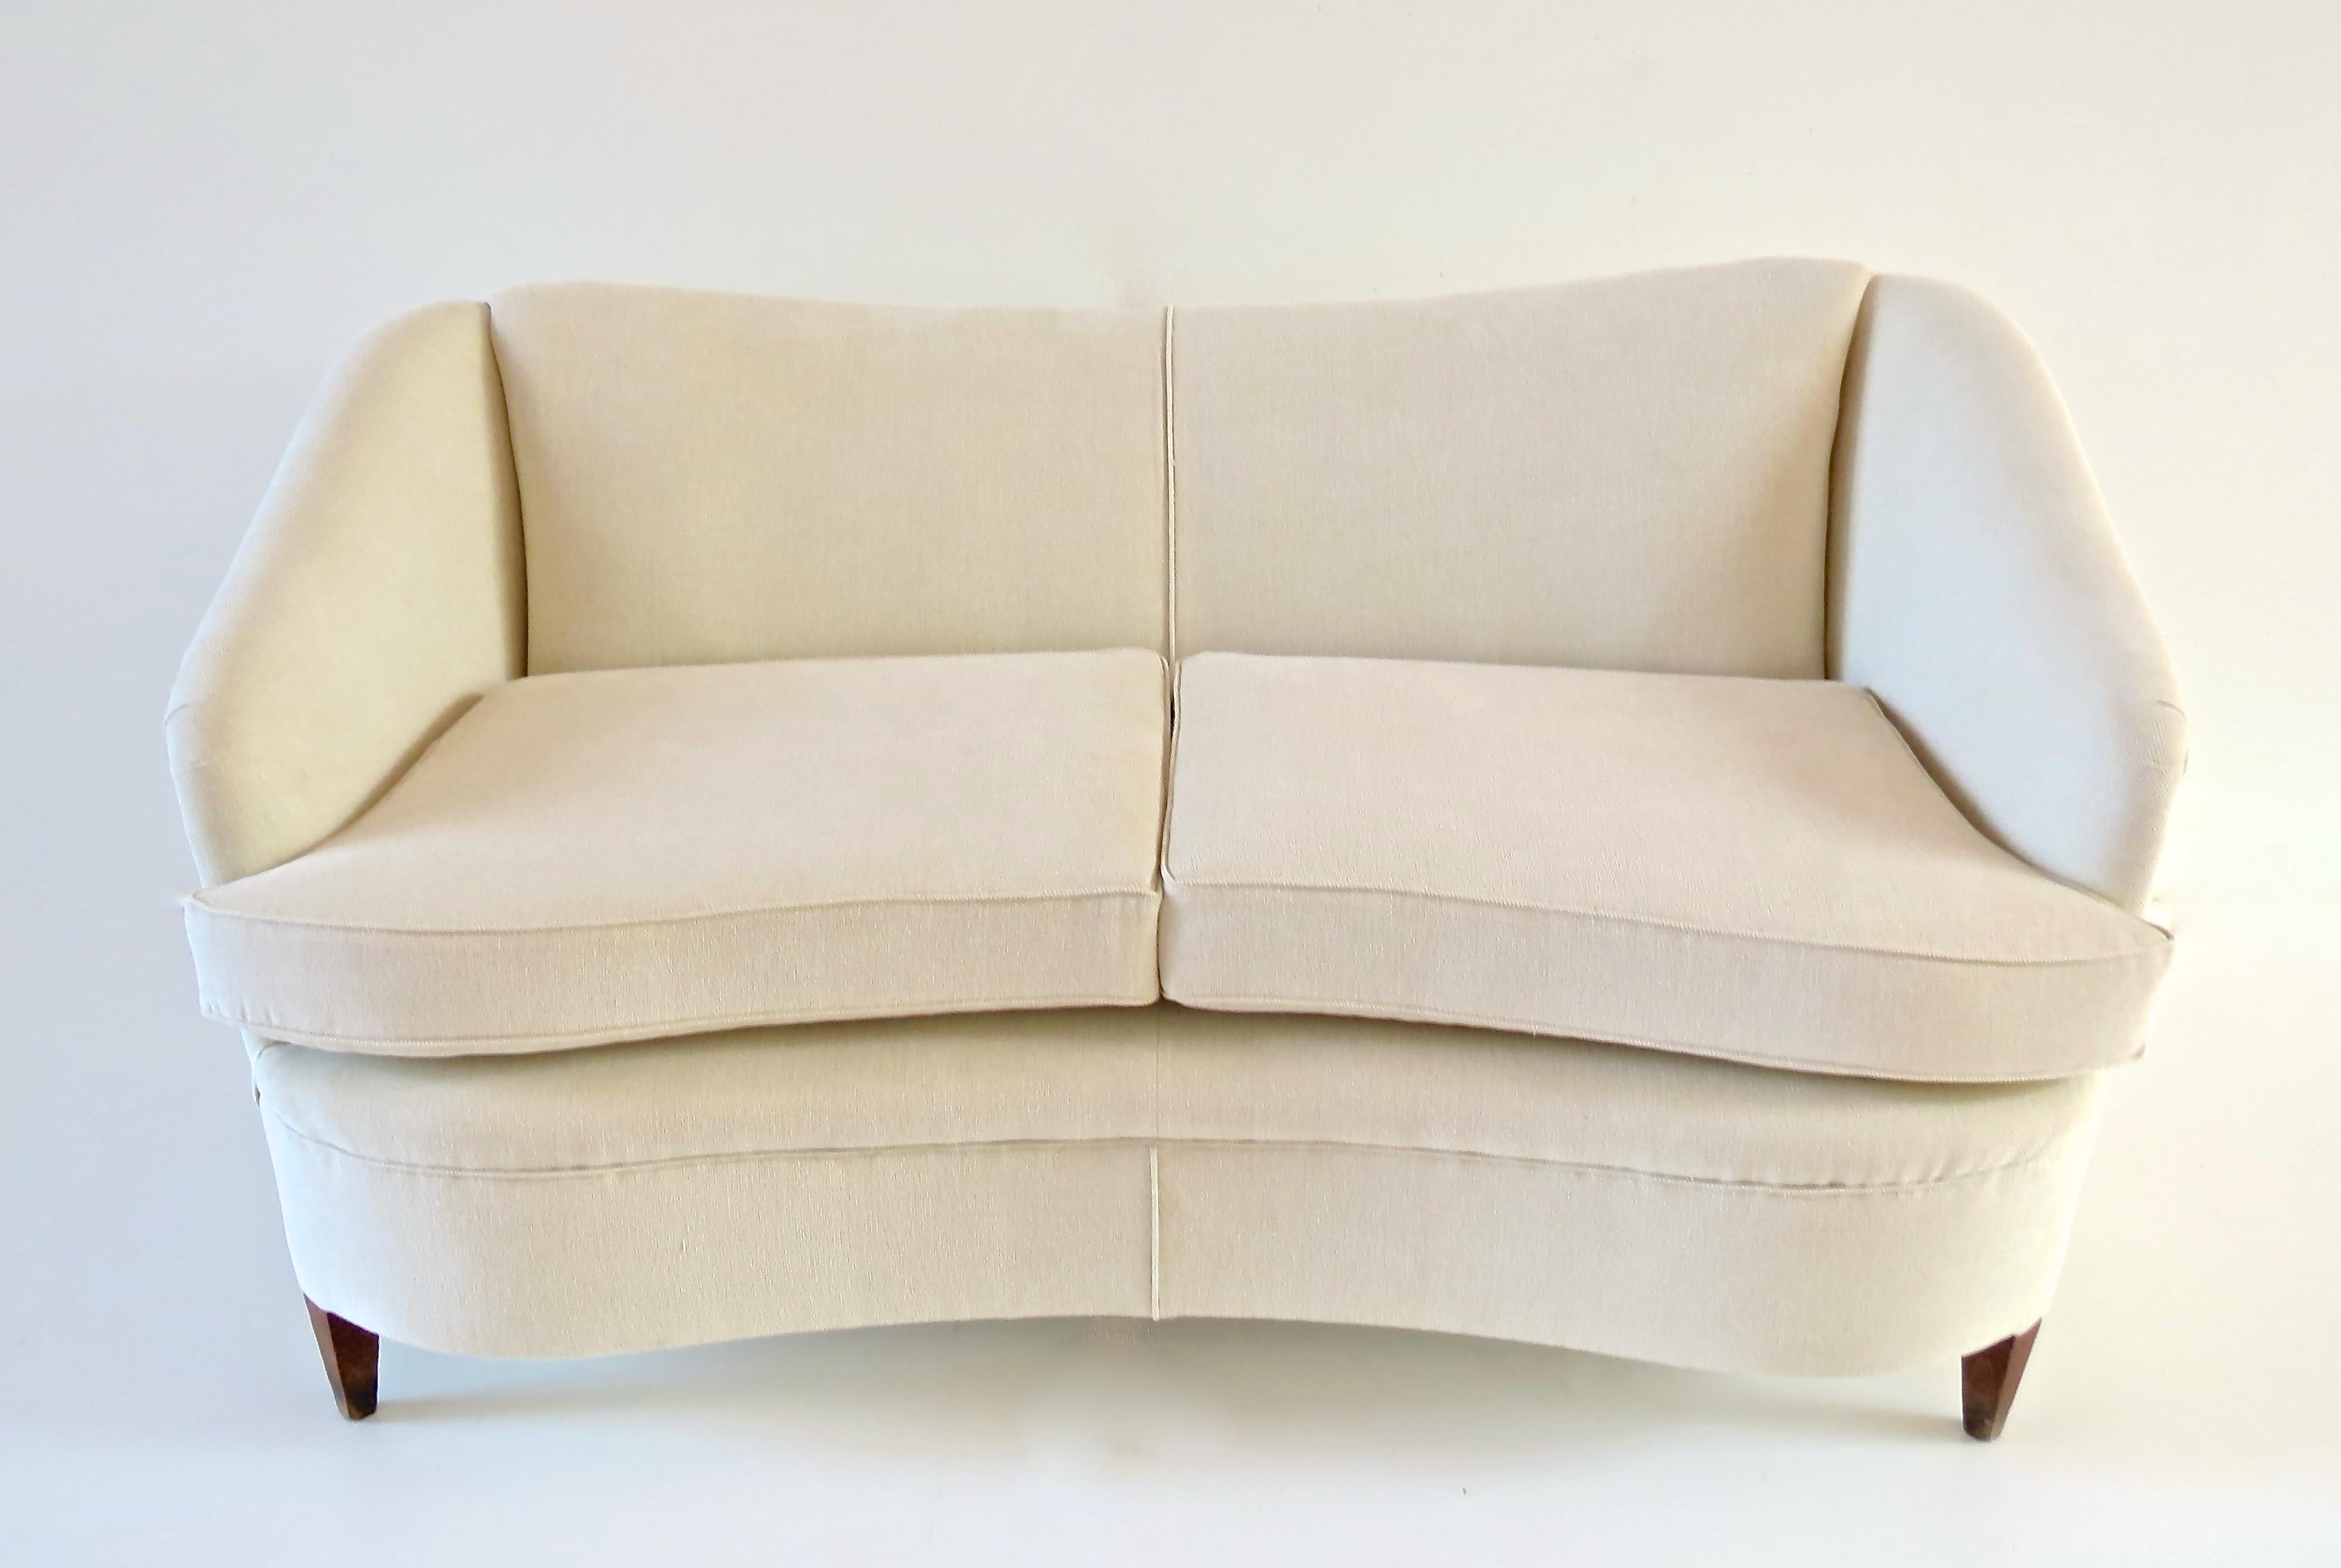 A Gio Ponti Casa & Giardino white sofa, circa 1938
walnut and fabric; white cotton and walnut feet
fully rest orated and newly upholstered
Measure: height 79, cm 152 x 82cm, high seat 46 cm
very good condition
available with this item a Gio